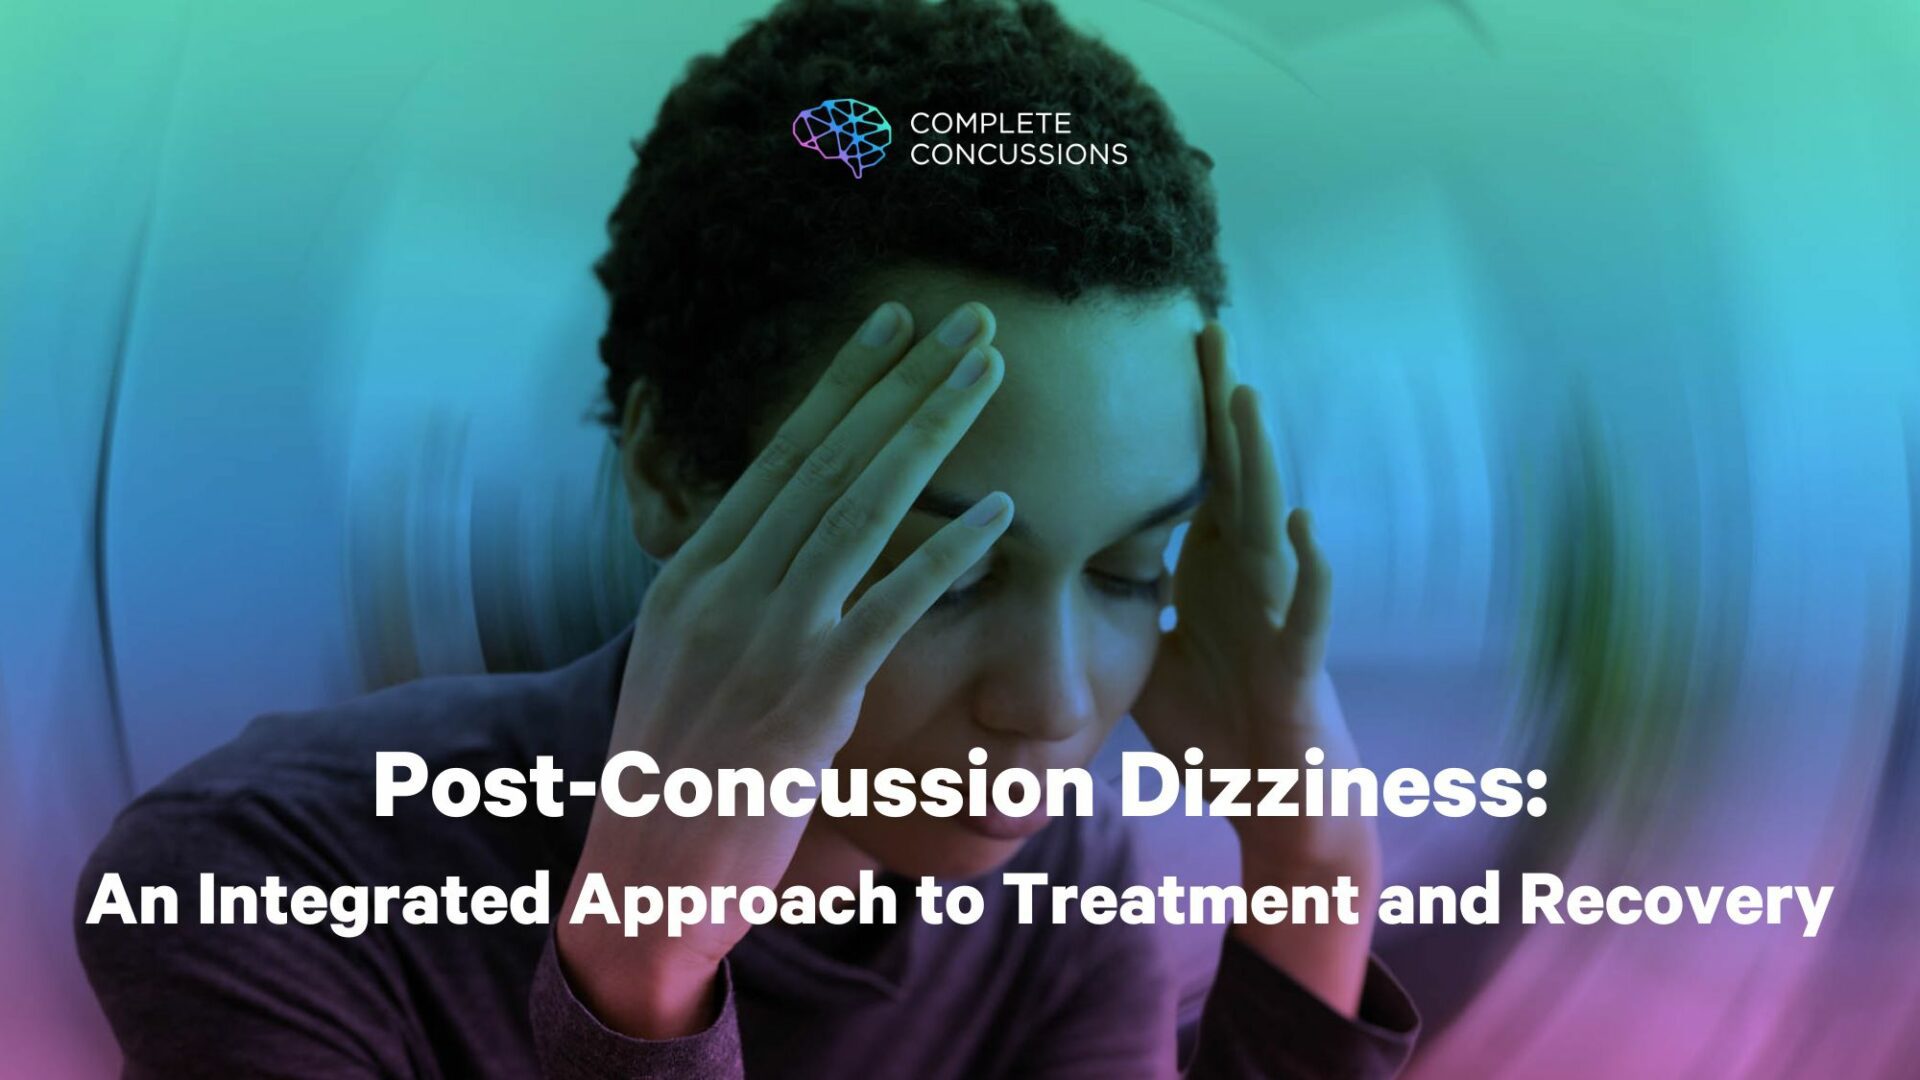 Post-Concussion Dizziness: An Integrated Approach to Treatment and Recovery